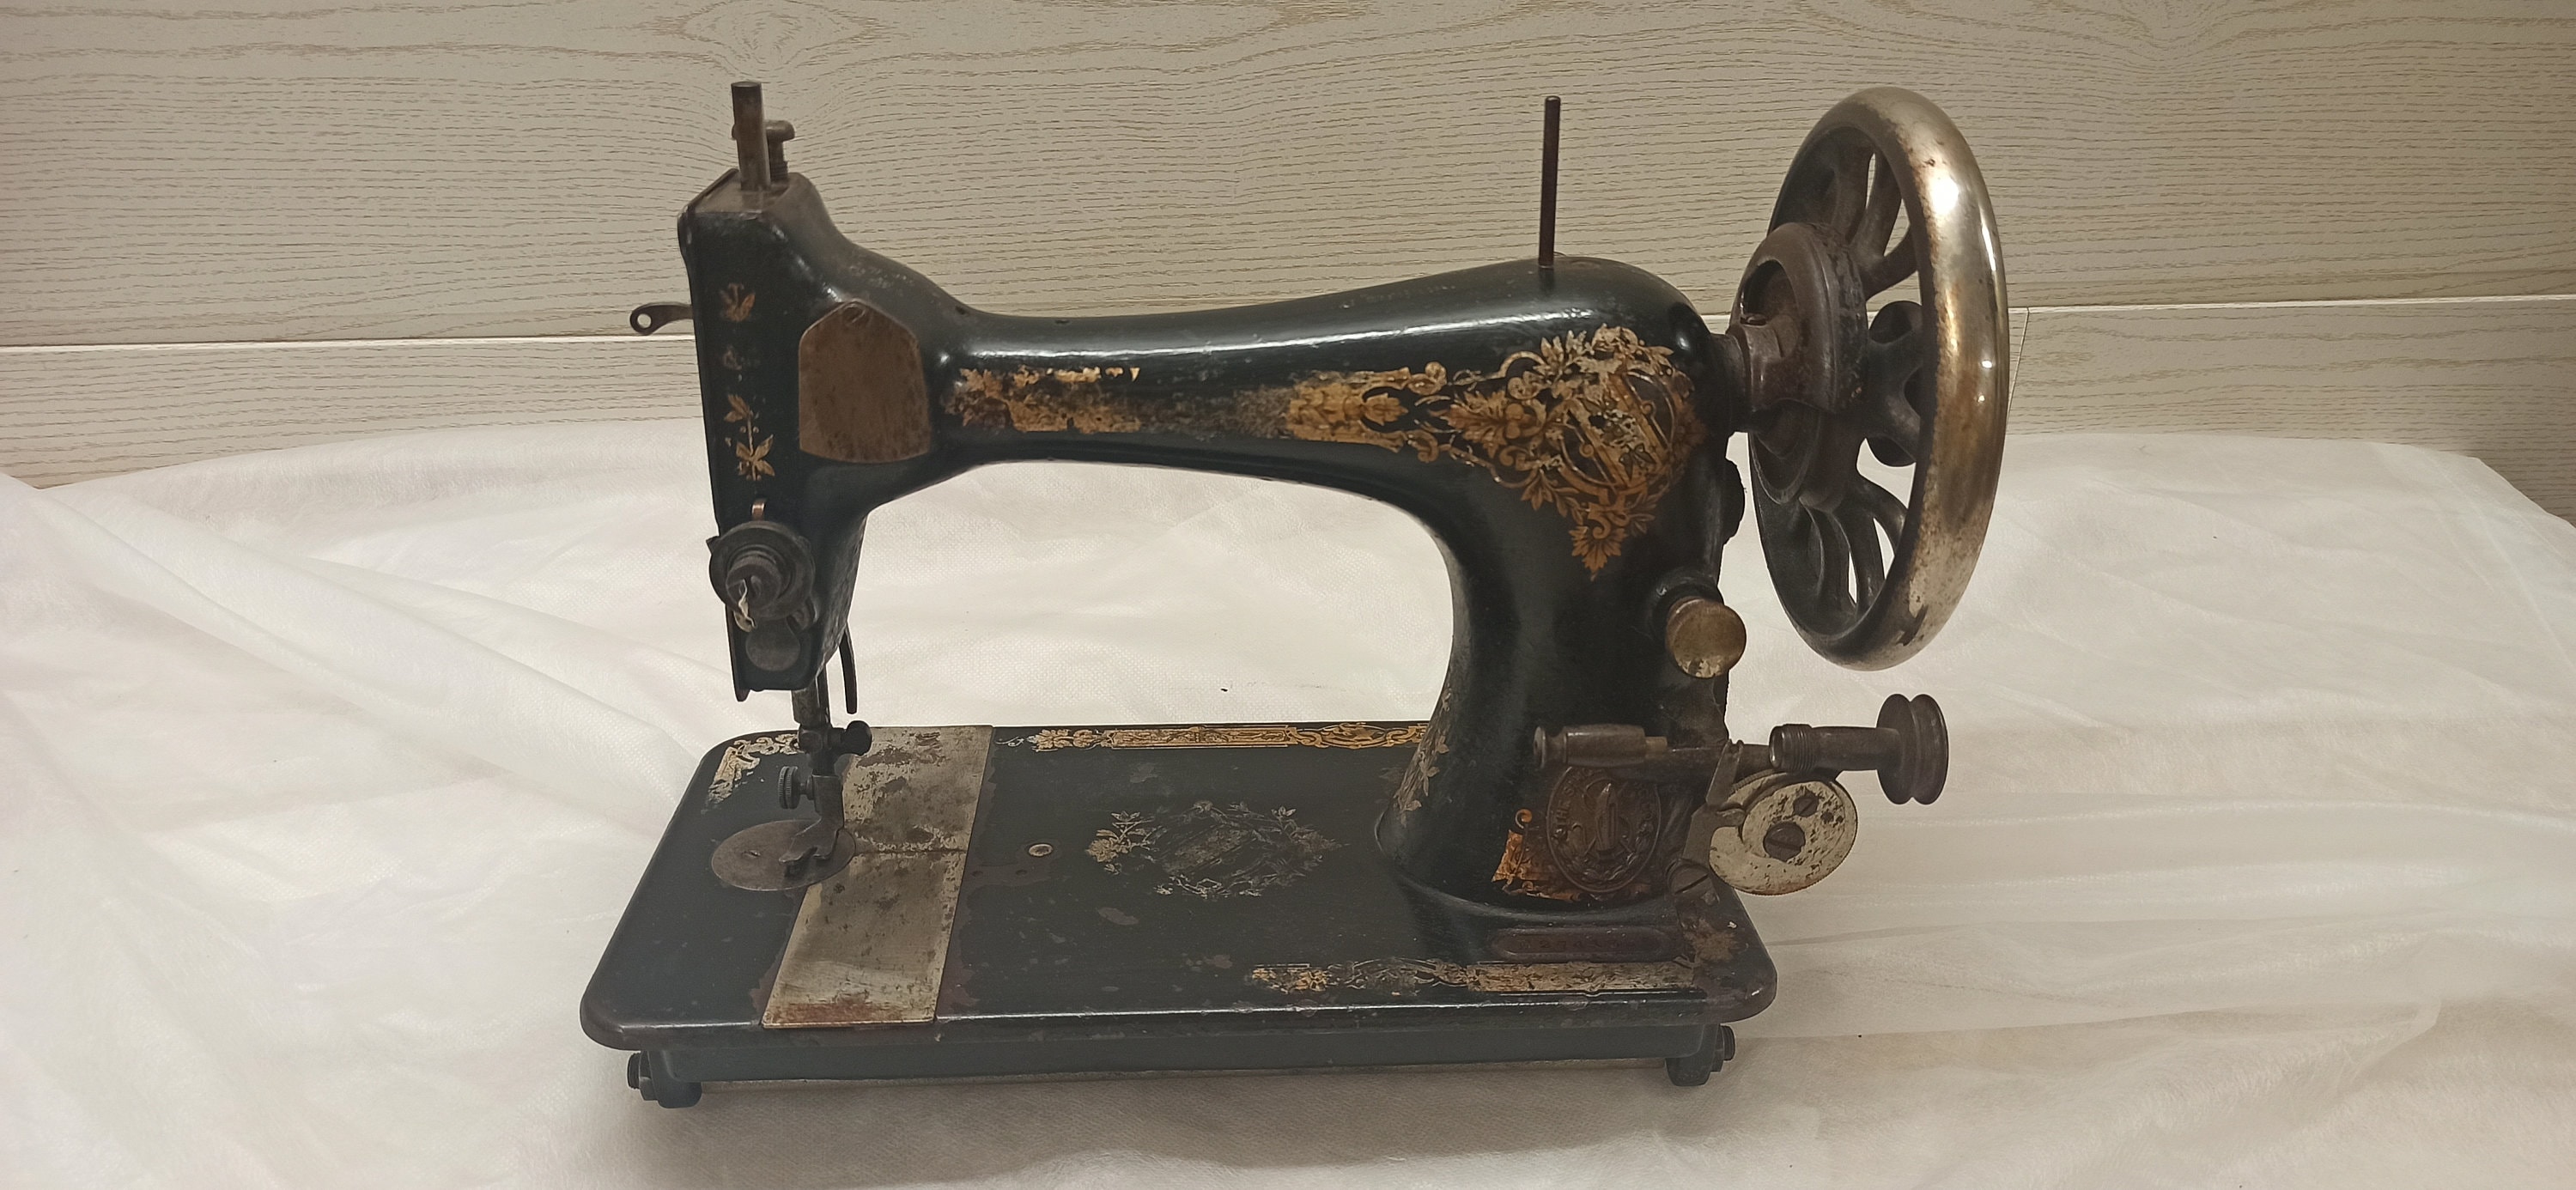 Original Antique Singer Sewing Machine Model 28 Commissioned January 10 1910